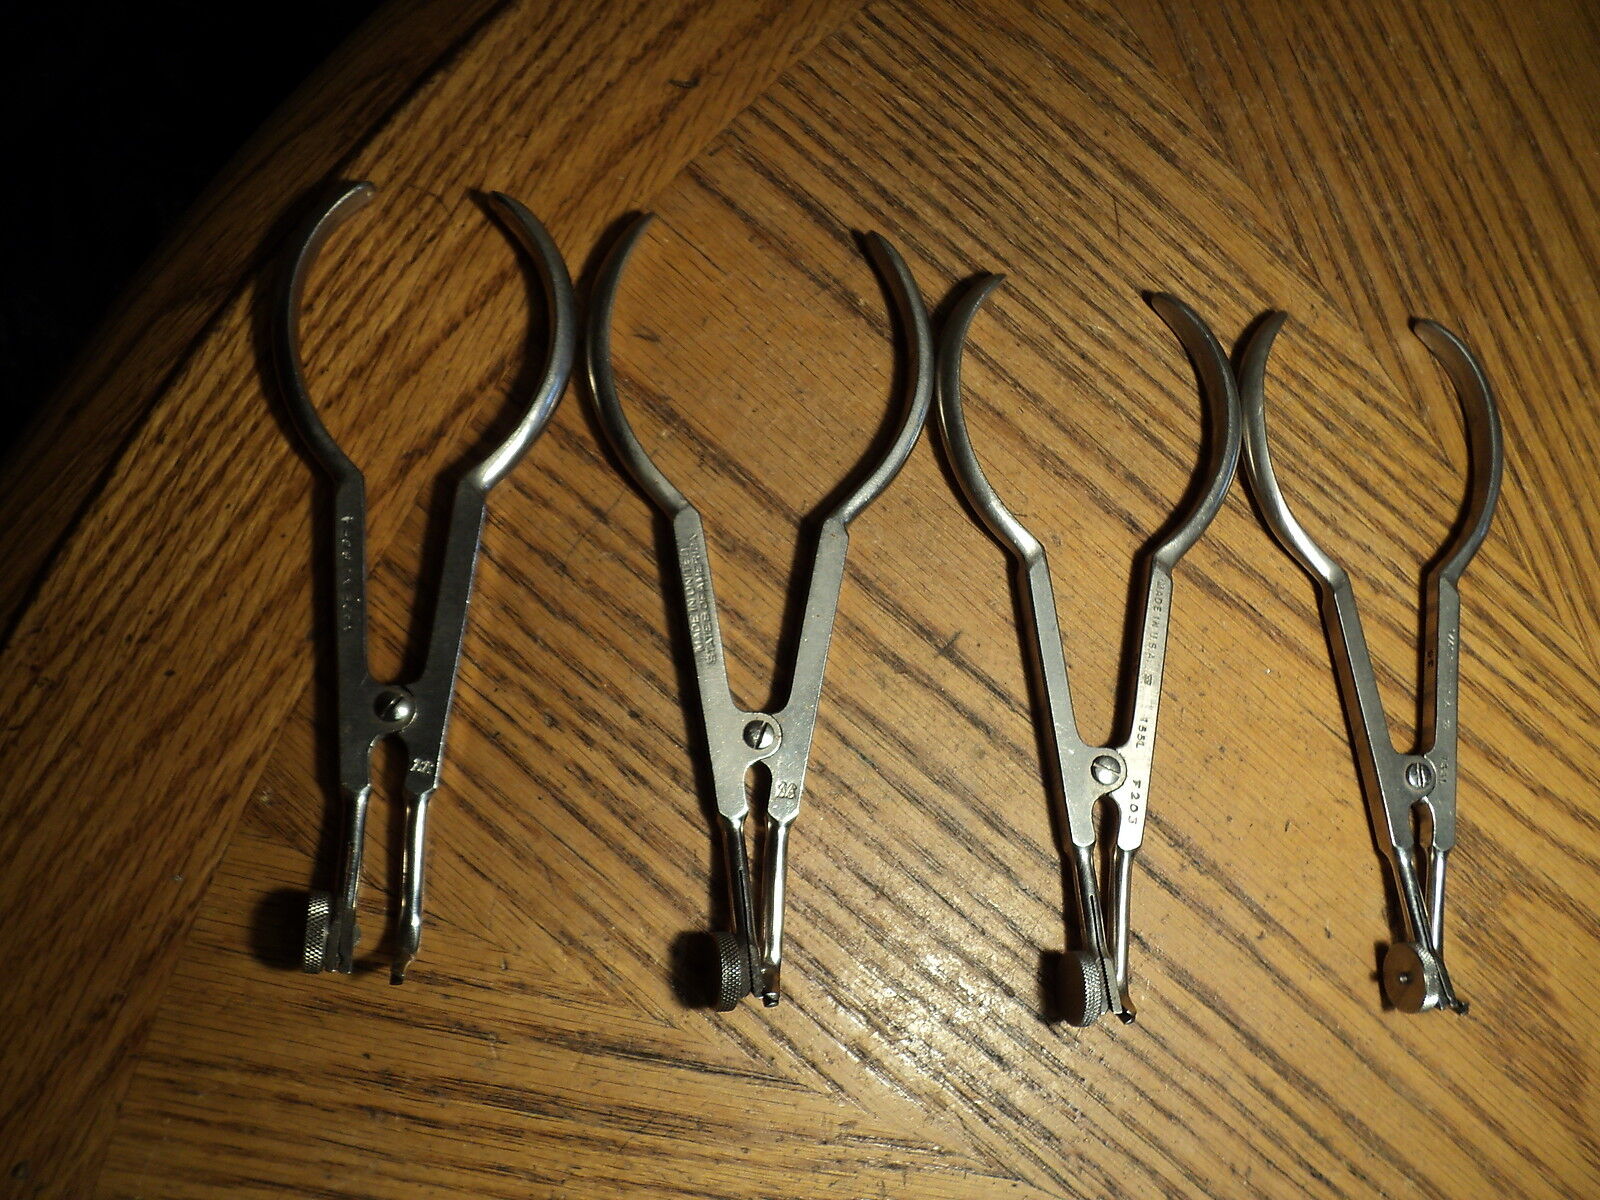 Vintage White Rubber Dam Clamp Forcepts Orthodontic Tool No. 155L 3 Designs 4 pc